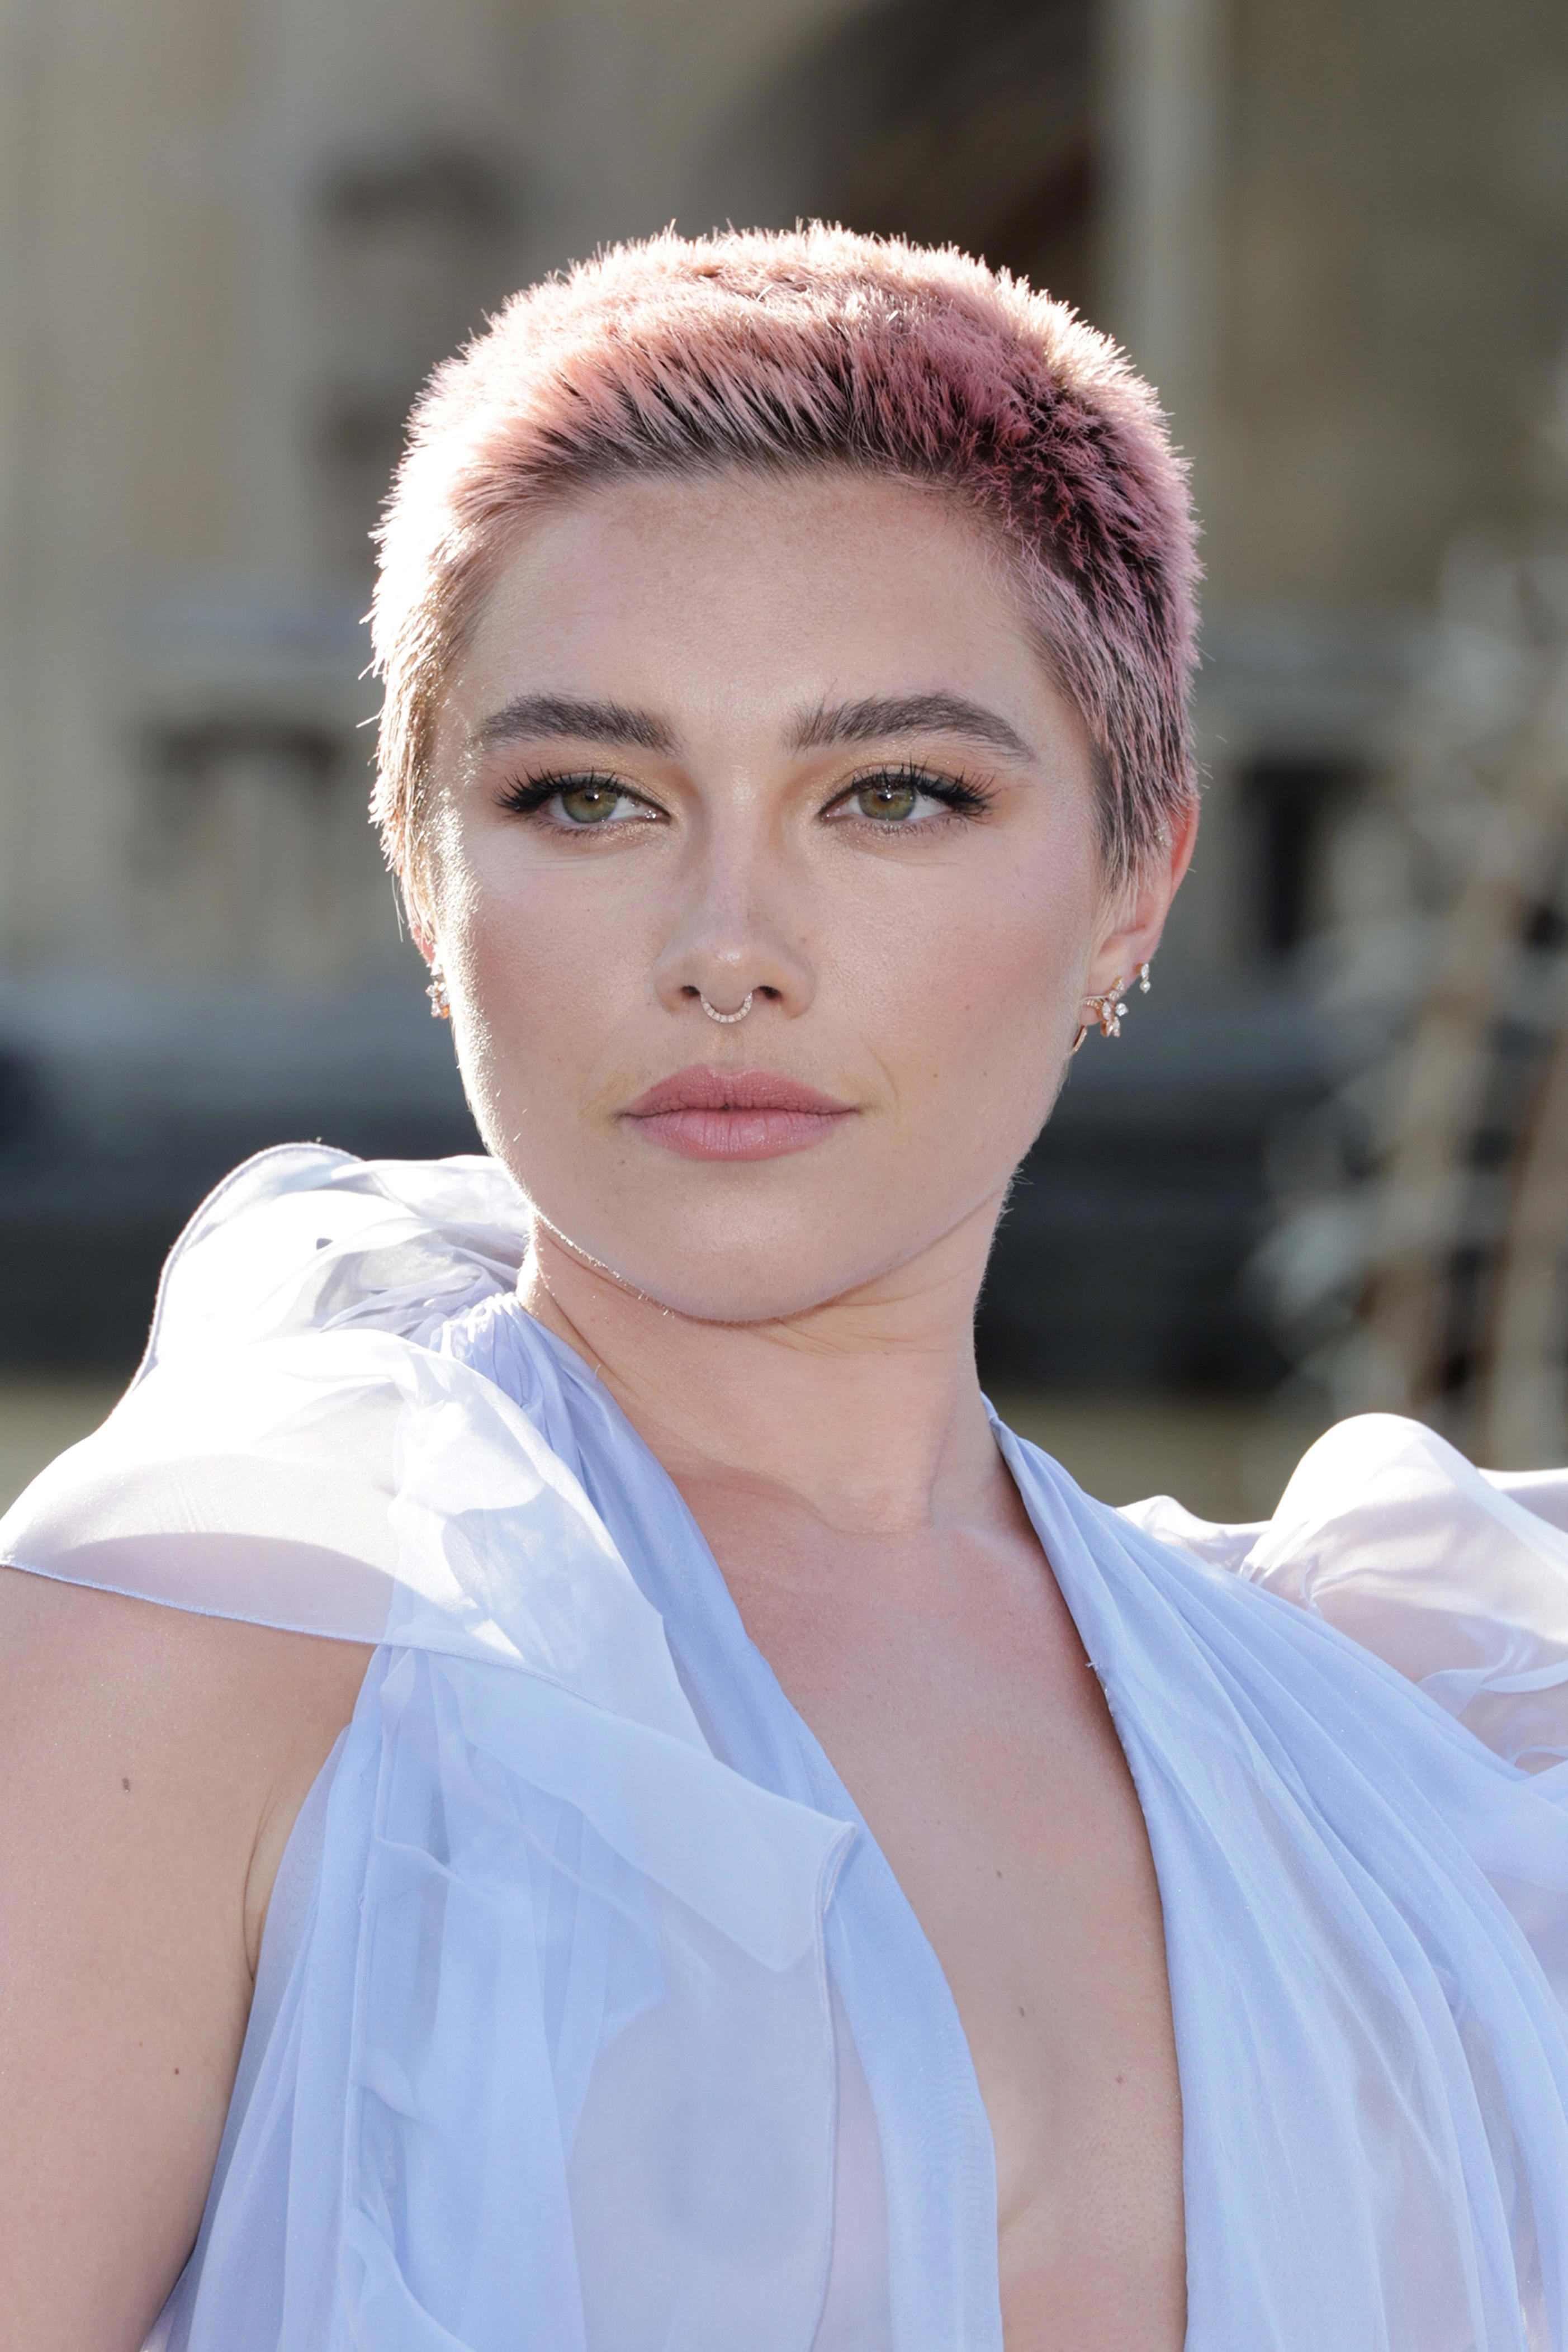 Florence Pugh bares it all again at Paris Fashion Week in sheer gown